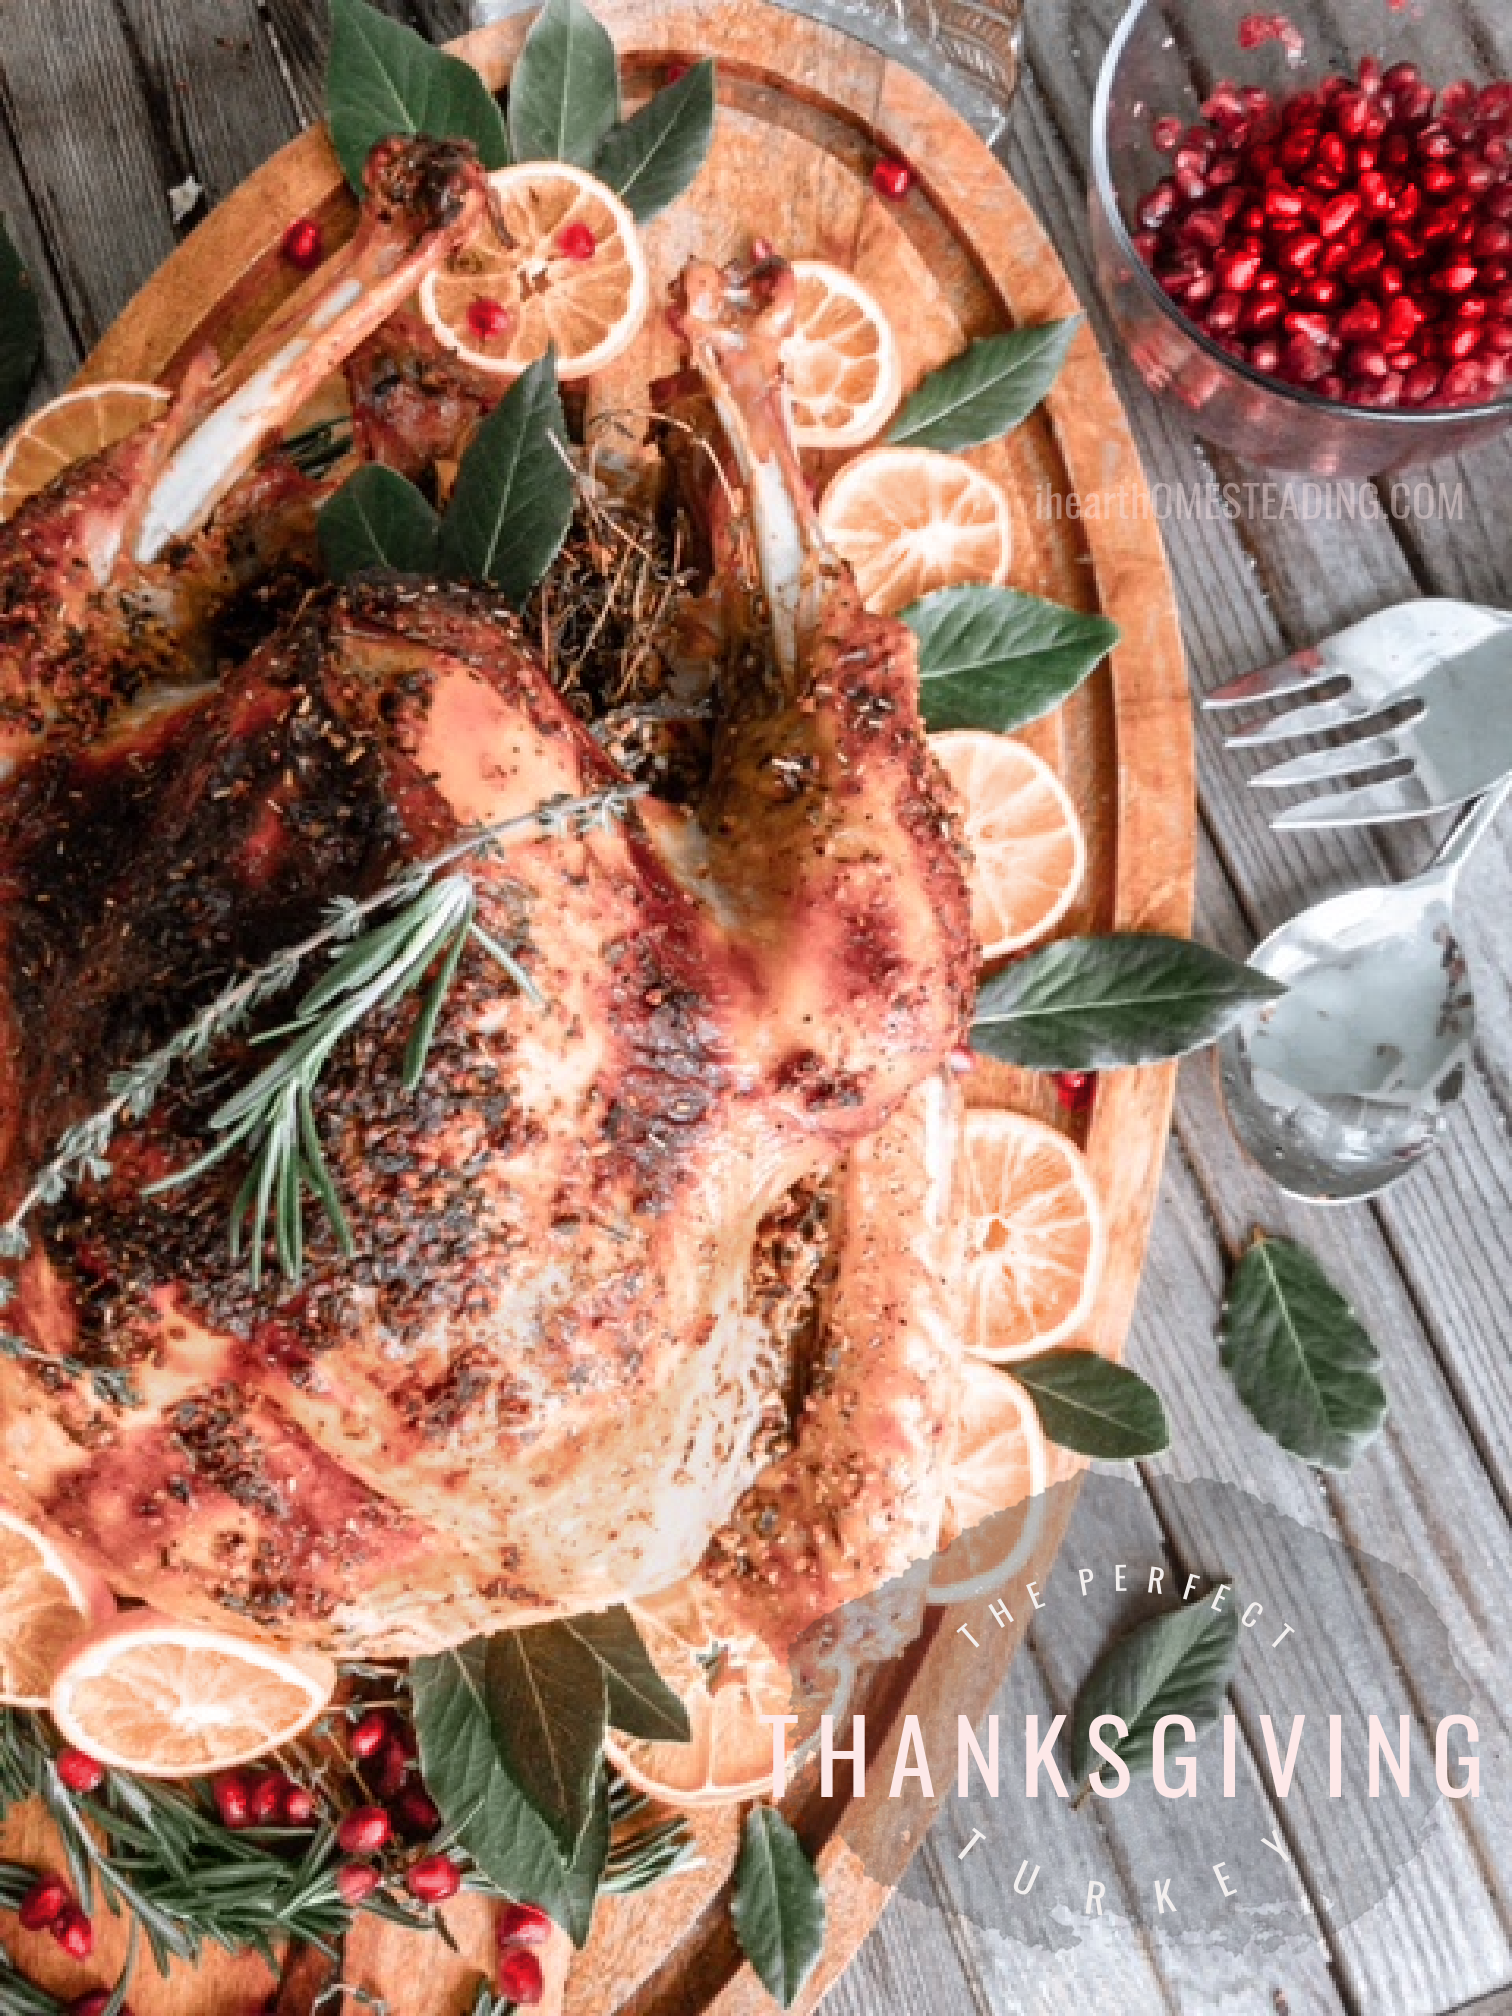 Tips and Tricks for the Perfect Thanksgiving Turkey